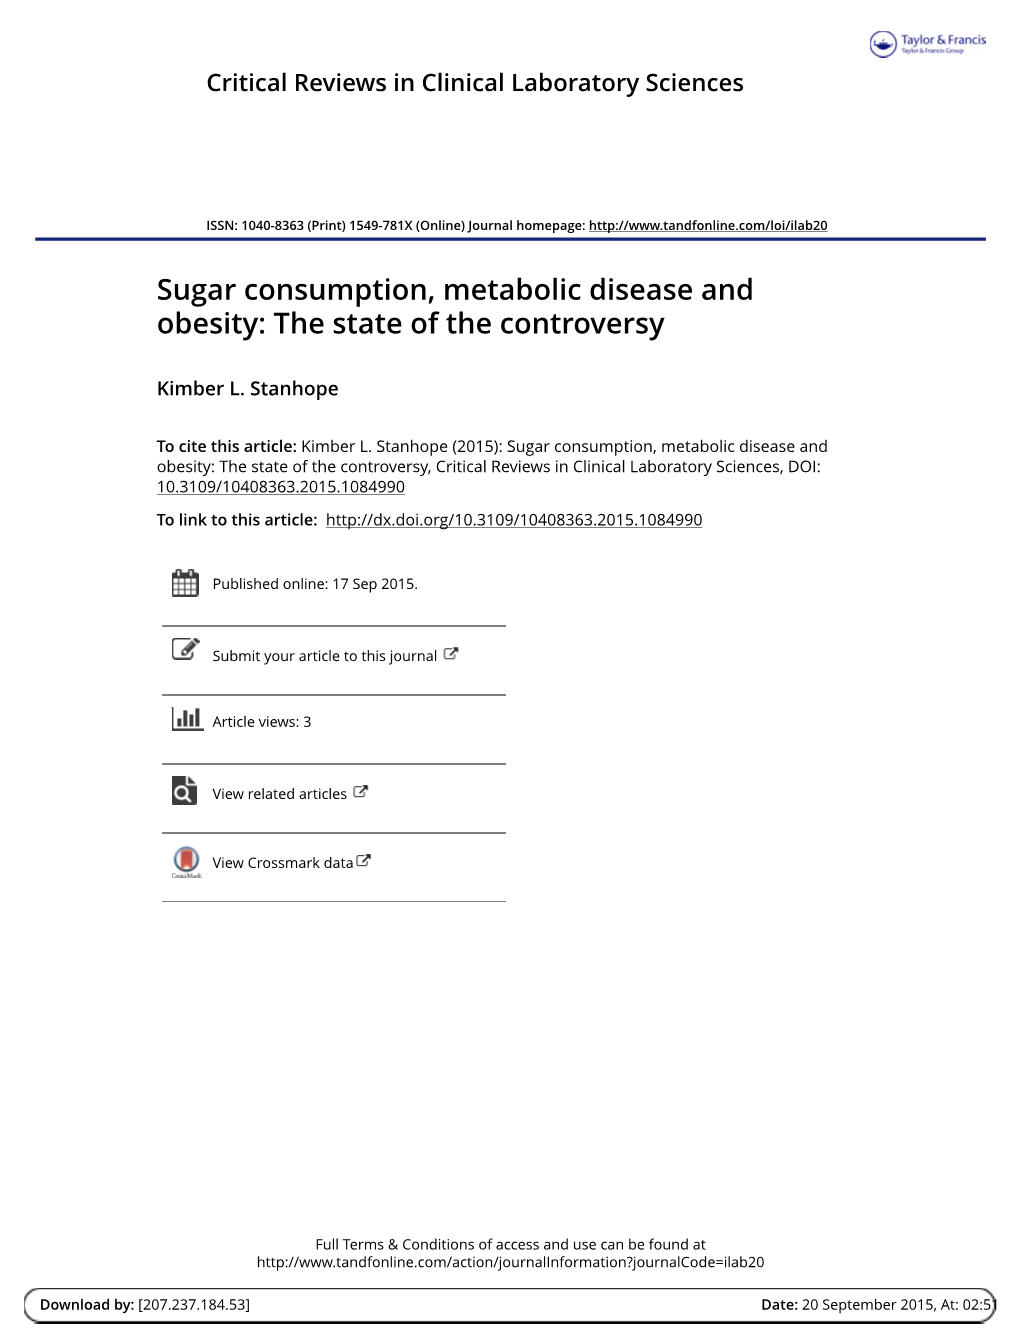 Sugar Consumption, Metabolic Disease and Obesity: the State of the Controversy